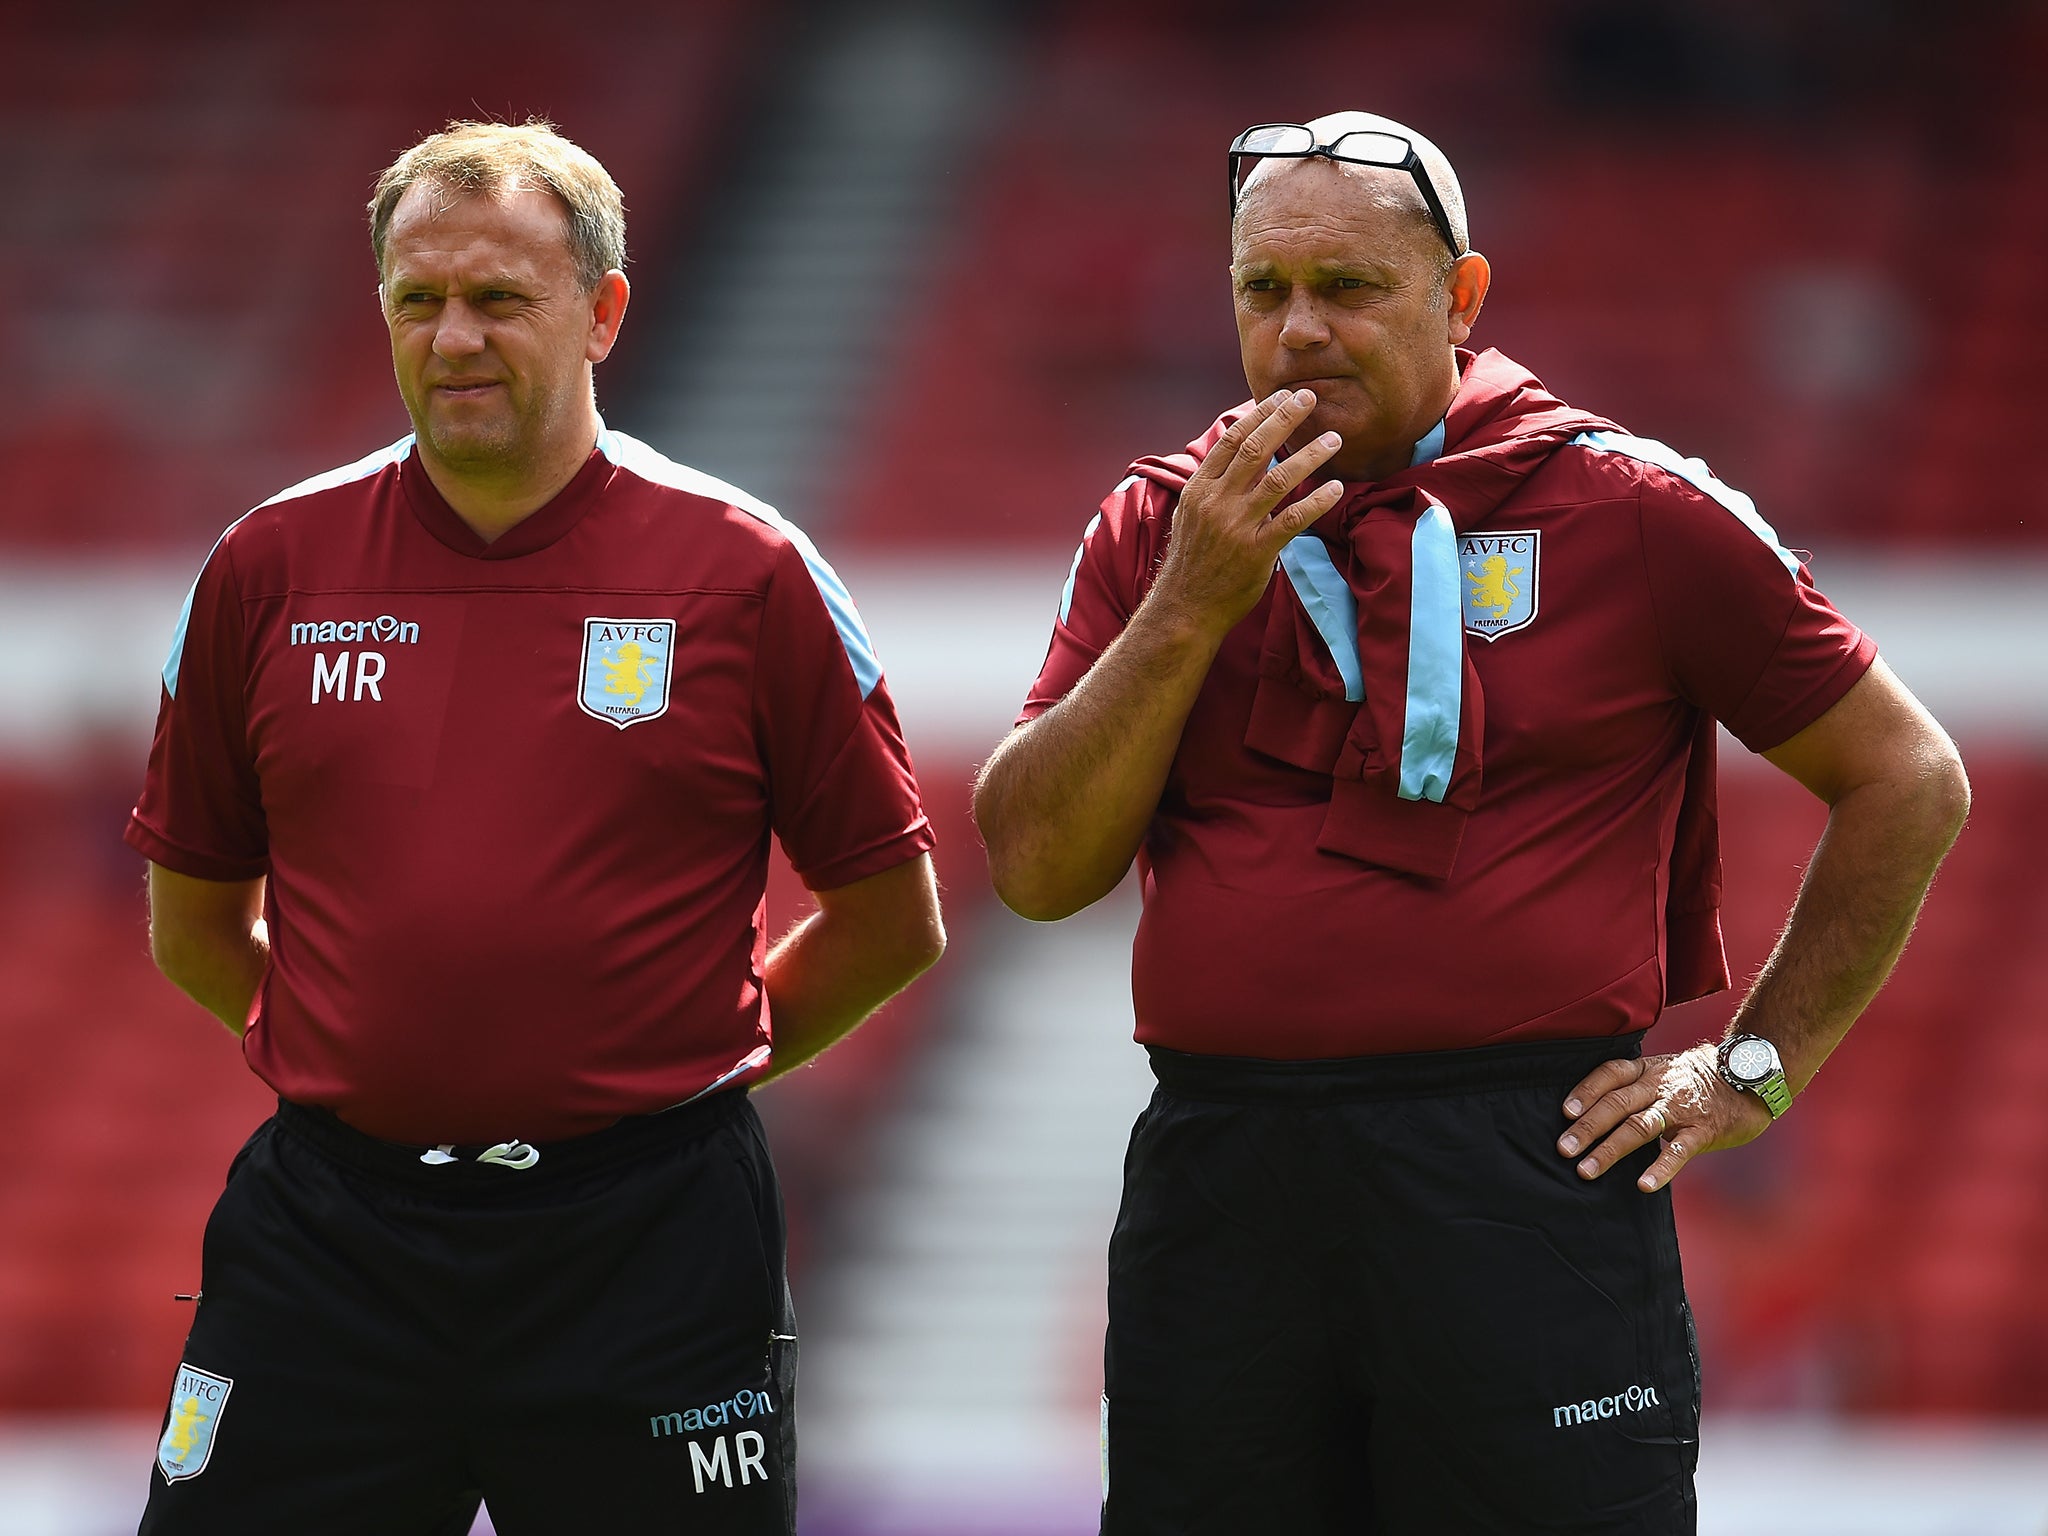 Wilkins’ final coaching role came with Aston Villa in 2015